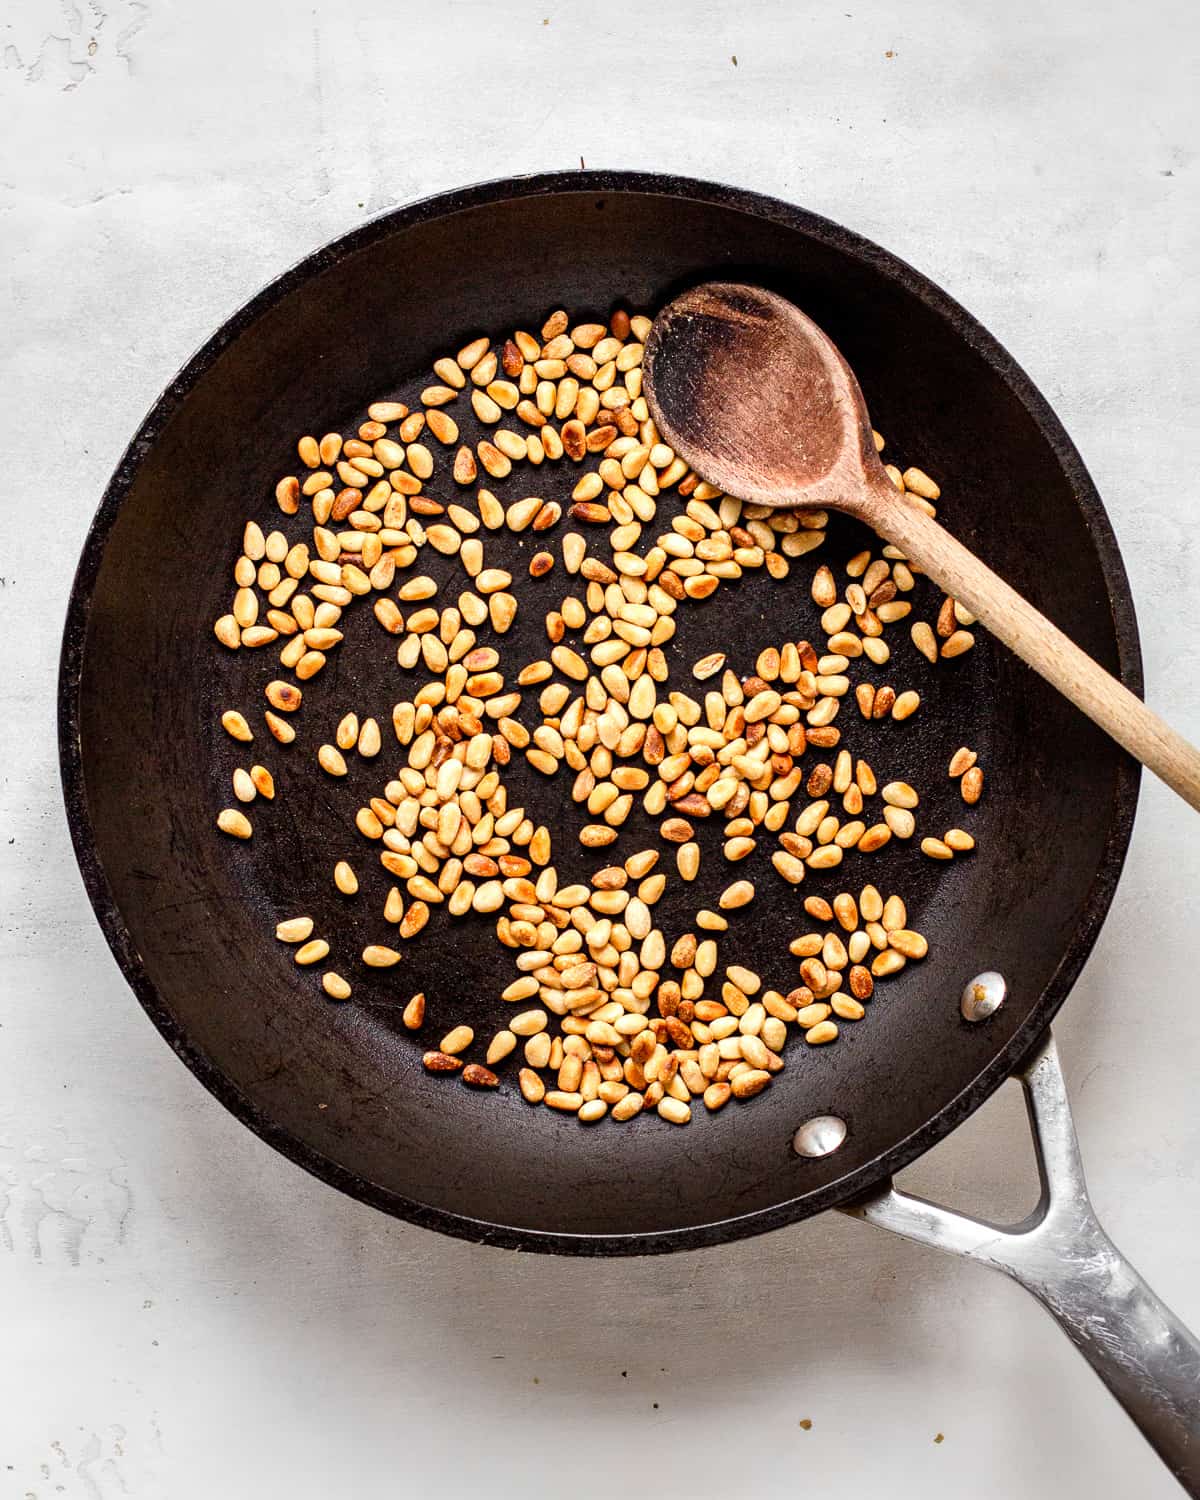 Roasted pine nuts in a cast-iron pan.